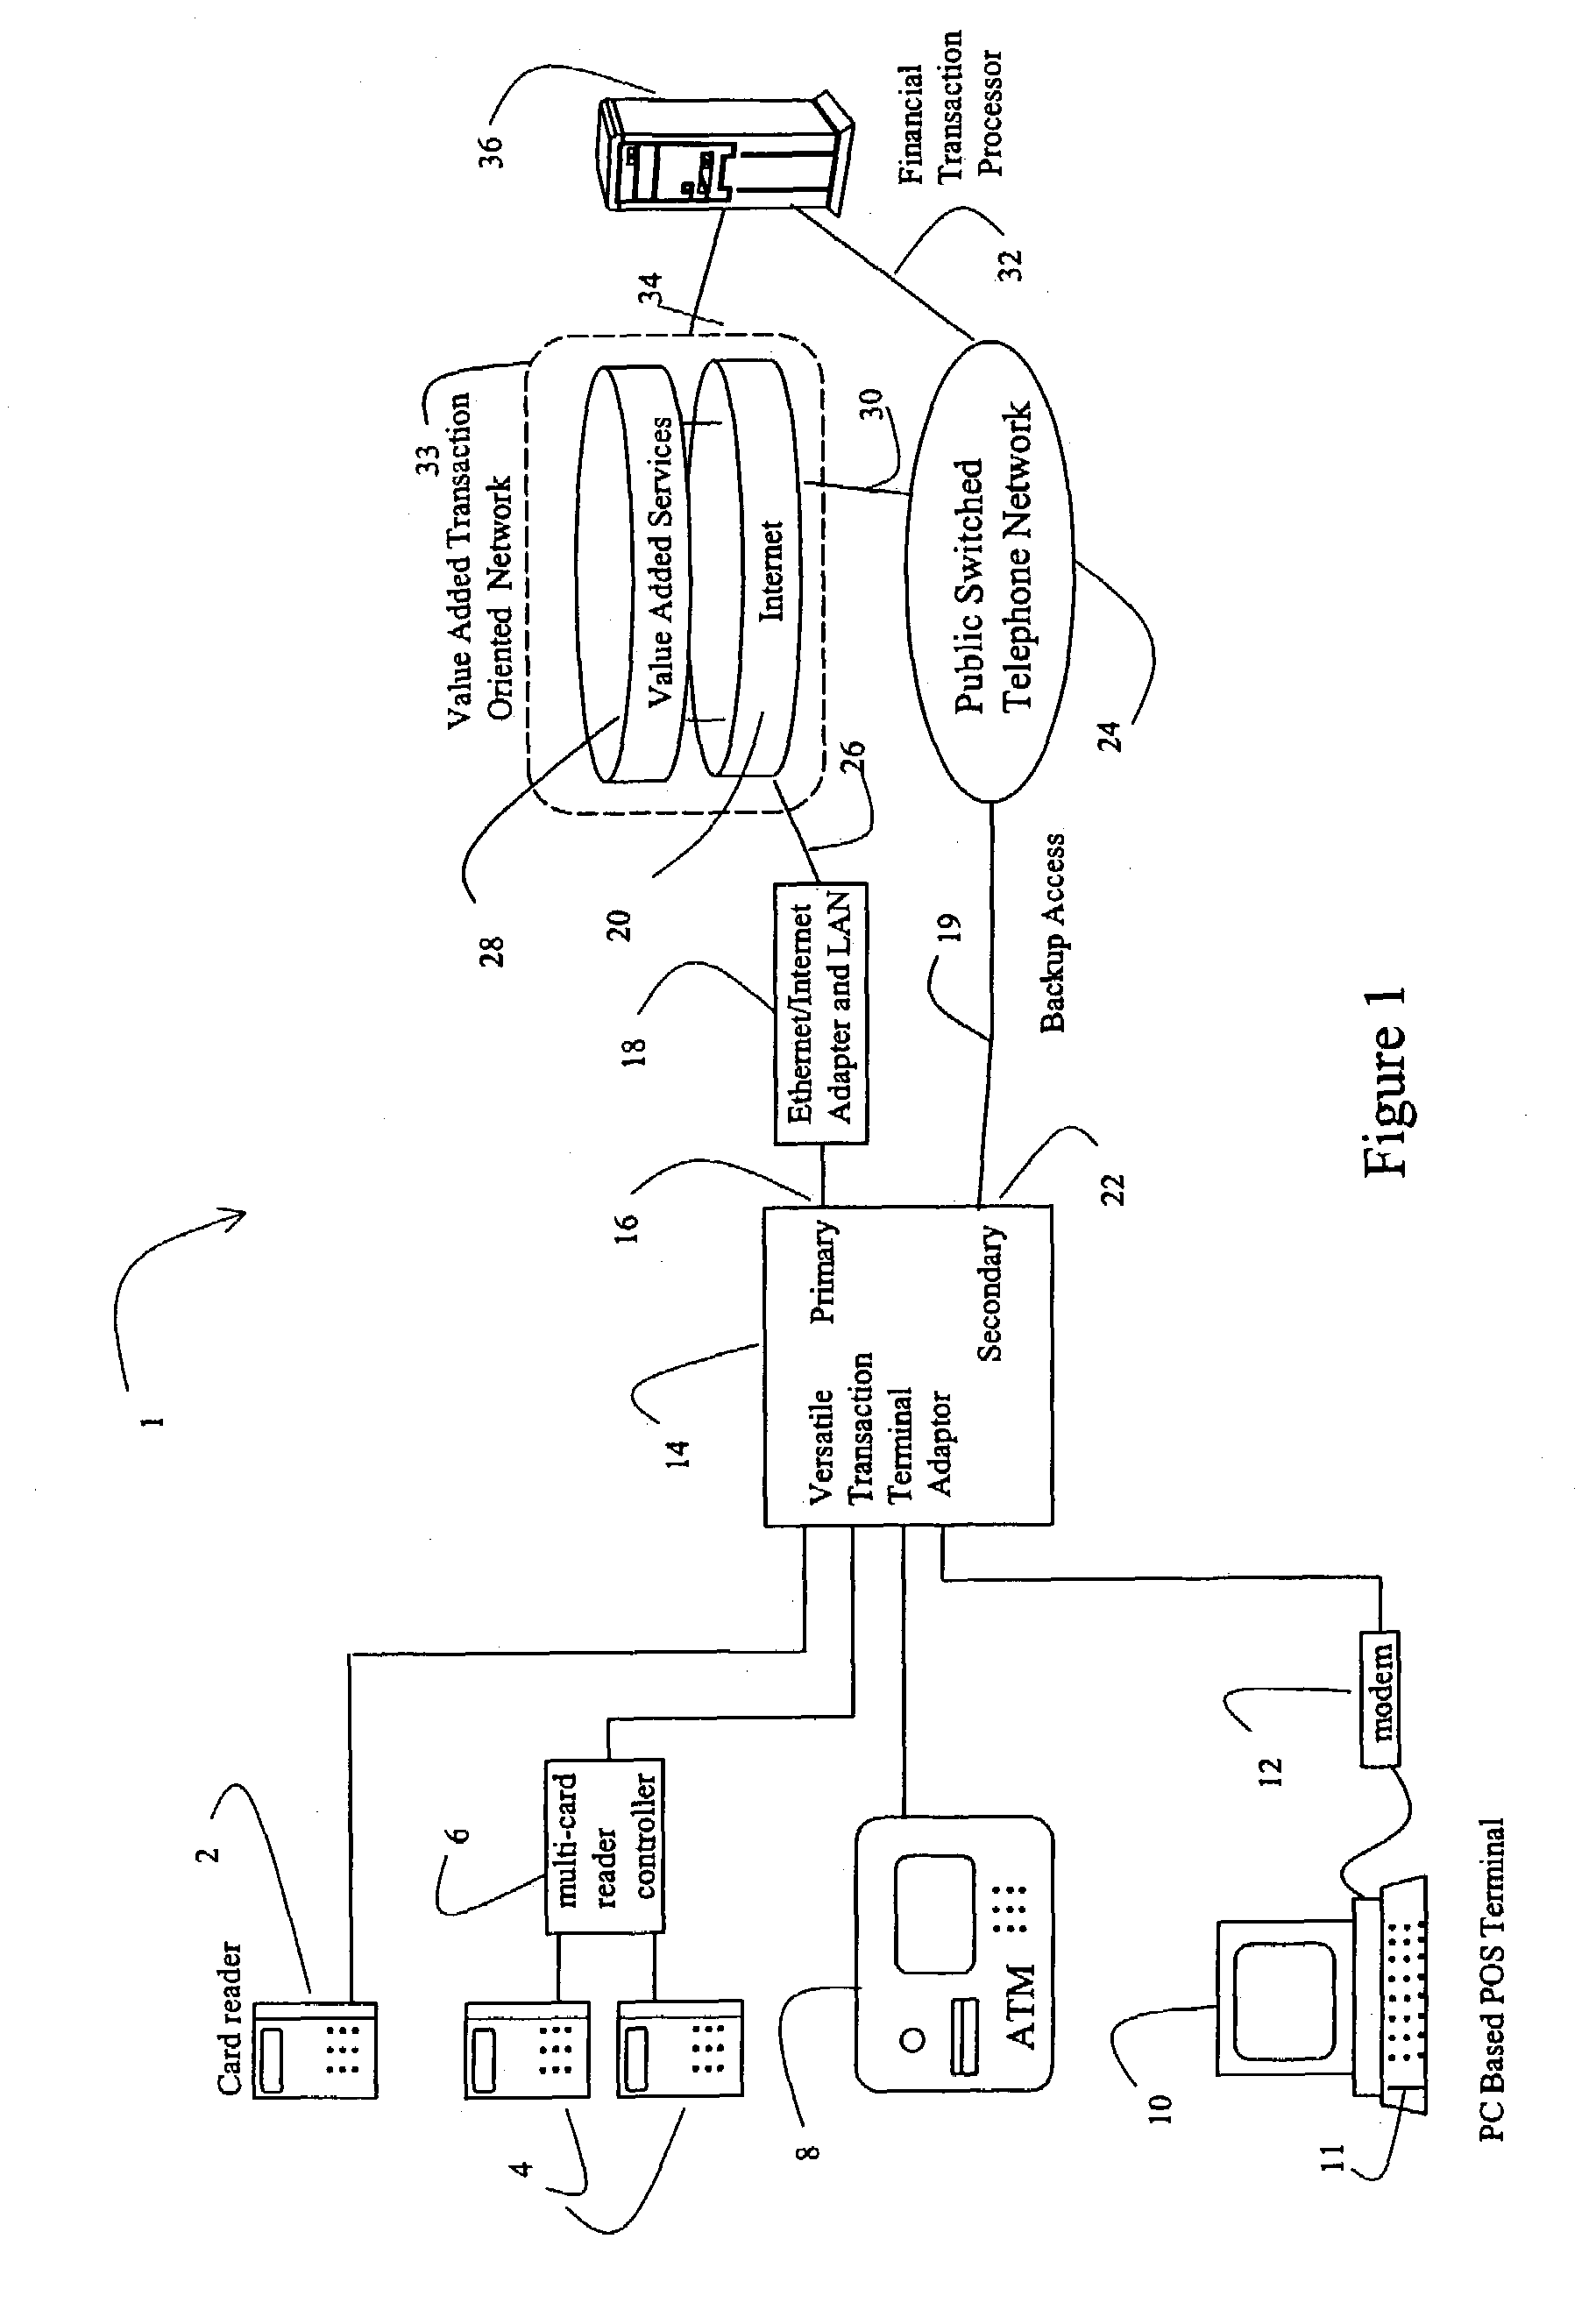 Versatile terminal adapter and network for transaction processing